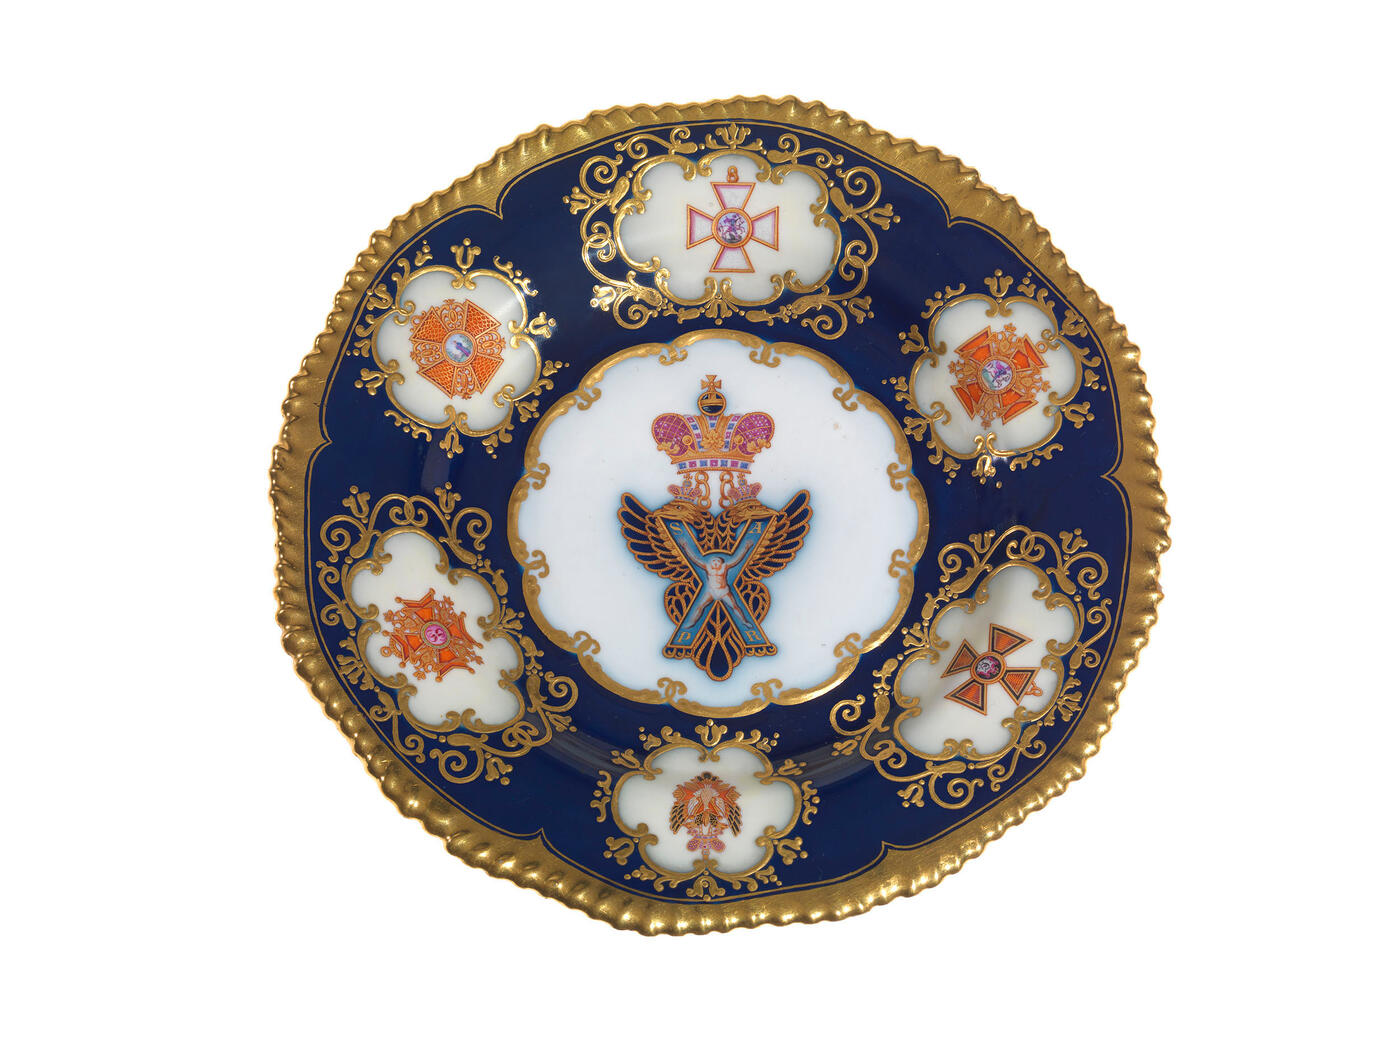 <br/>IMPERIAL PORCELAIN MANUFACTORY, PERIOD OF NICHOLAS I (1825–1855)